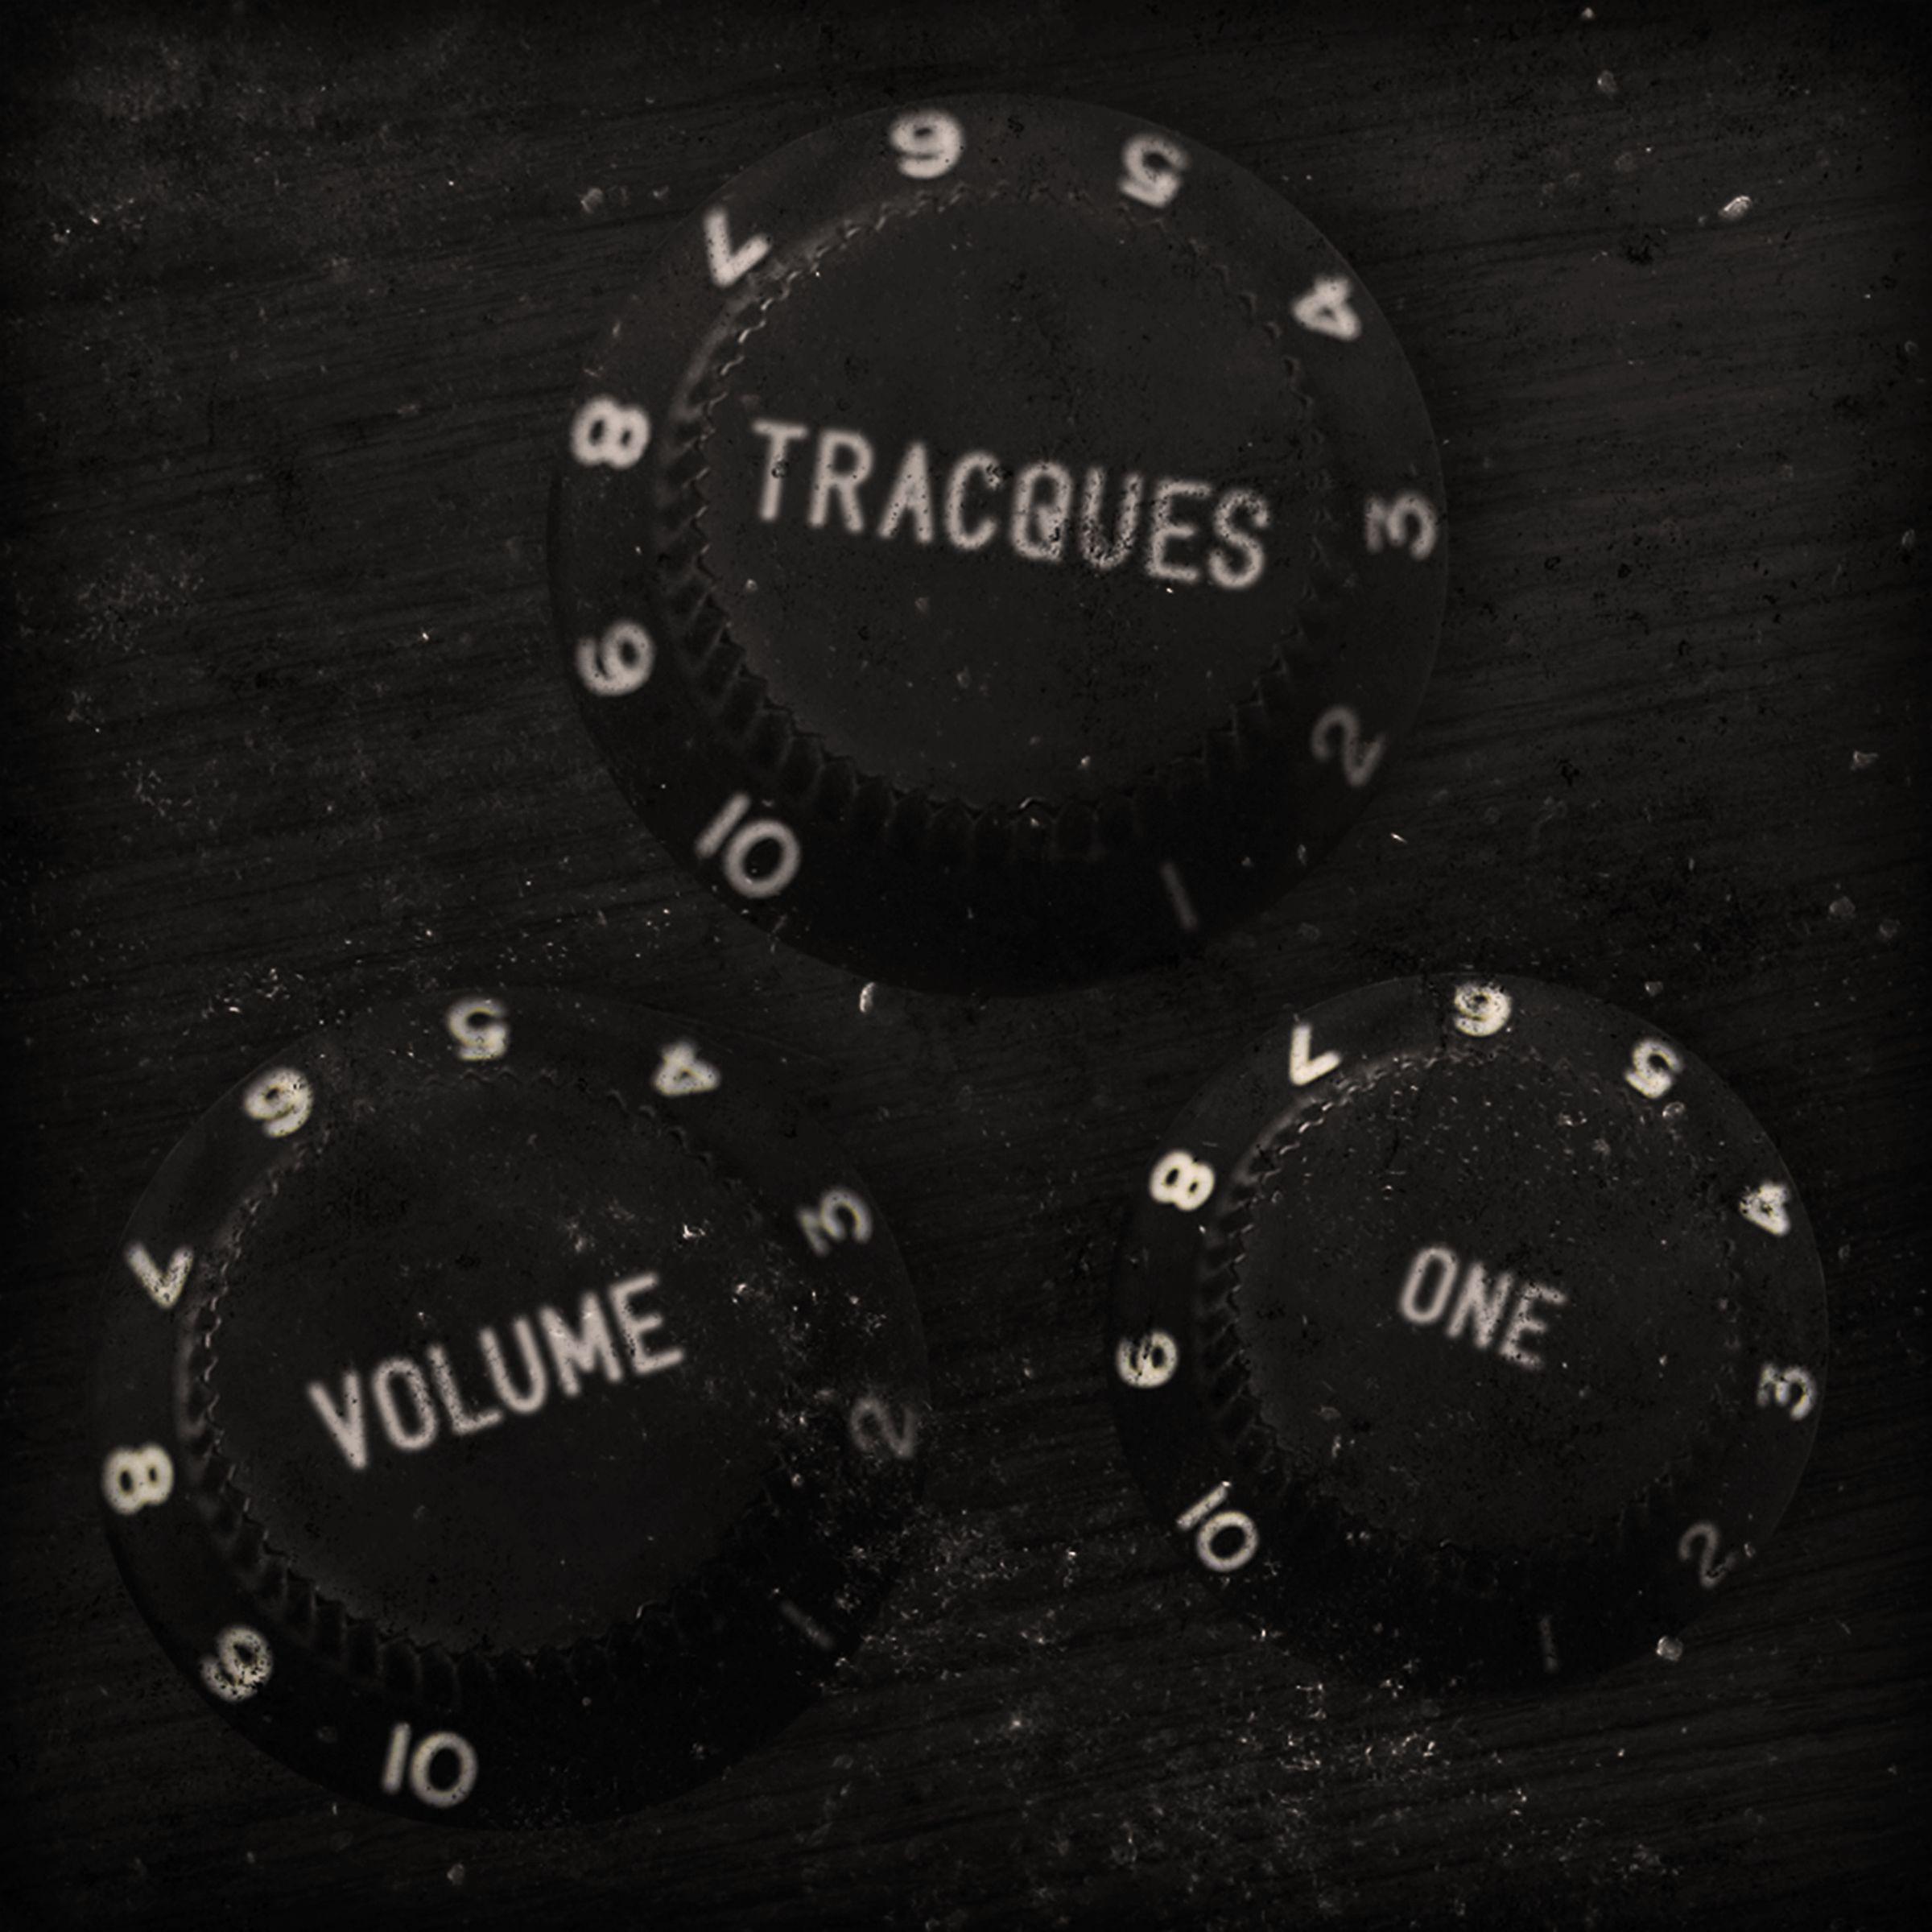 Tracques - The Fly